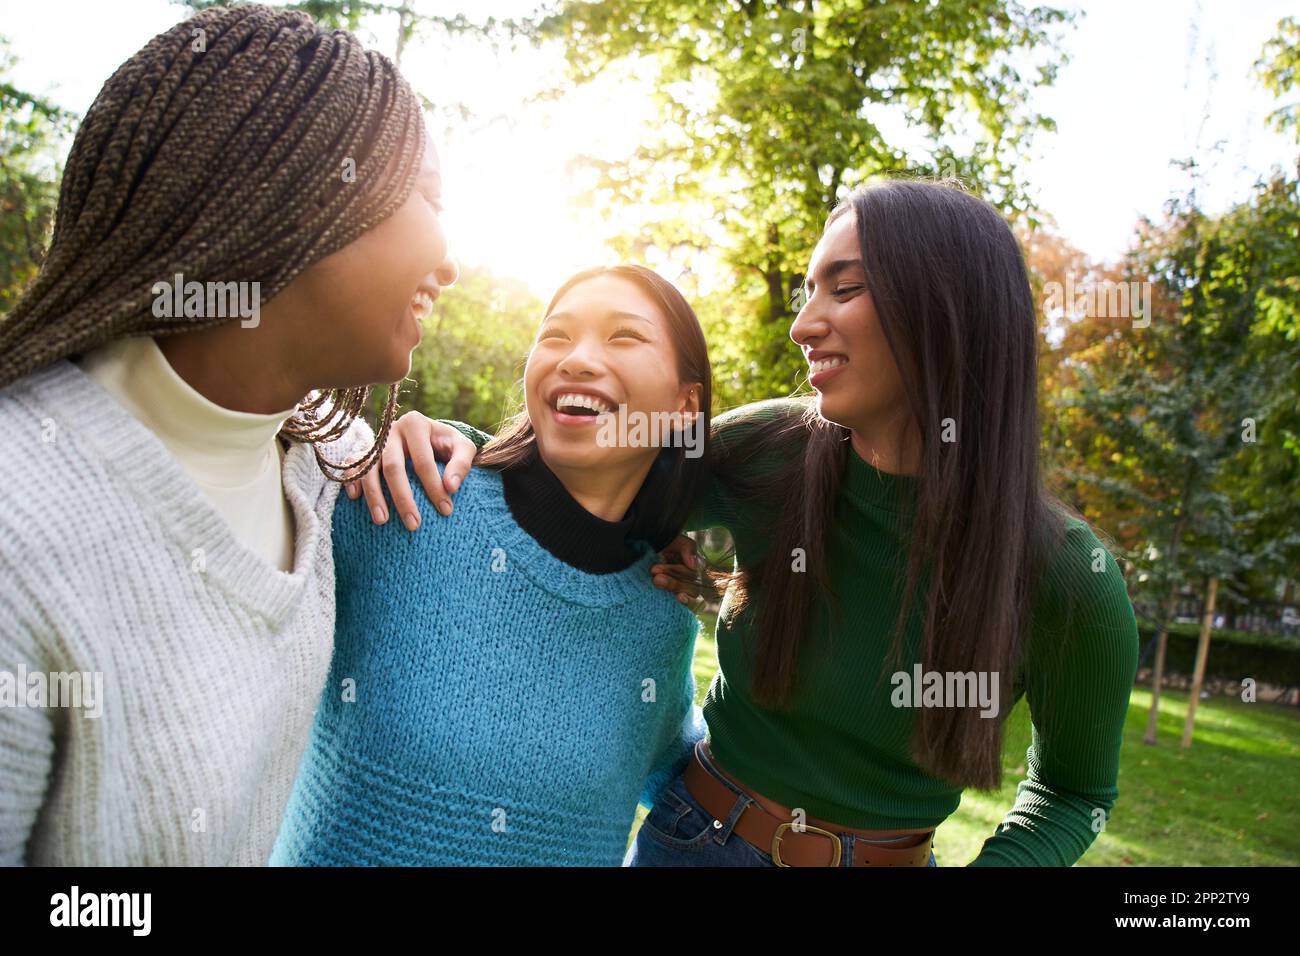 Portrait of three girls having fun outdoors on a sunny spring day. People enjoying their free time. Stock Photo